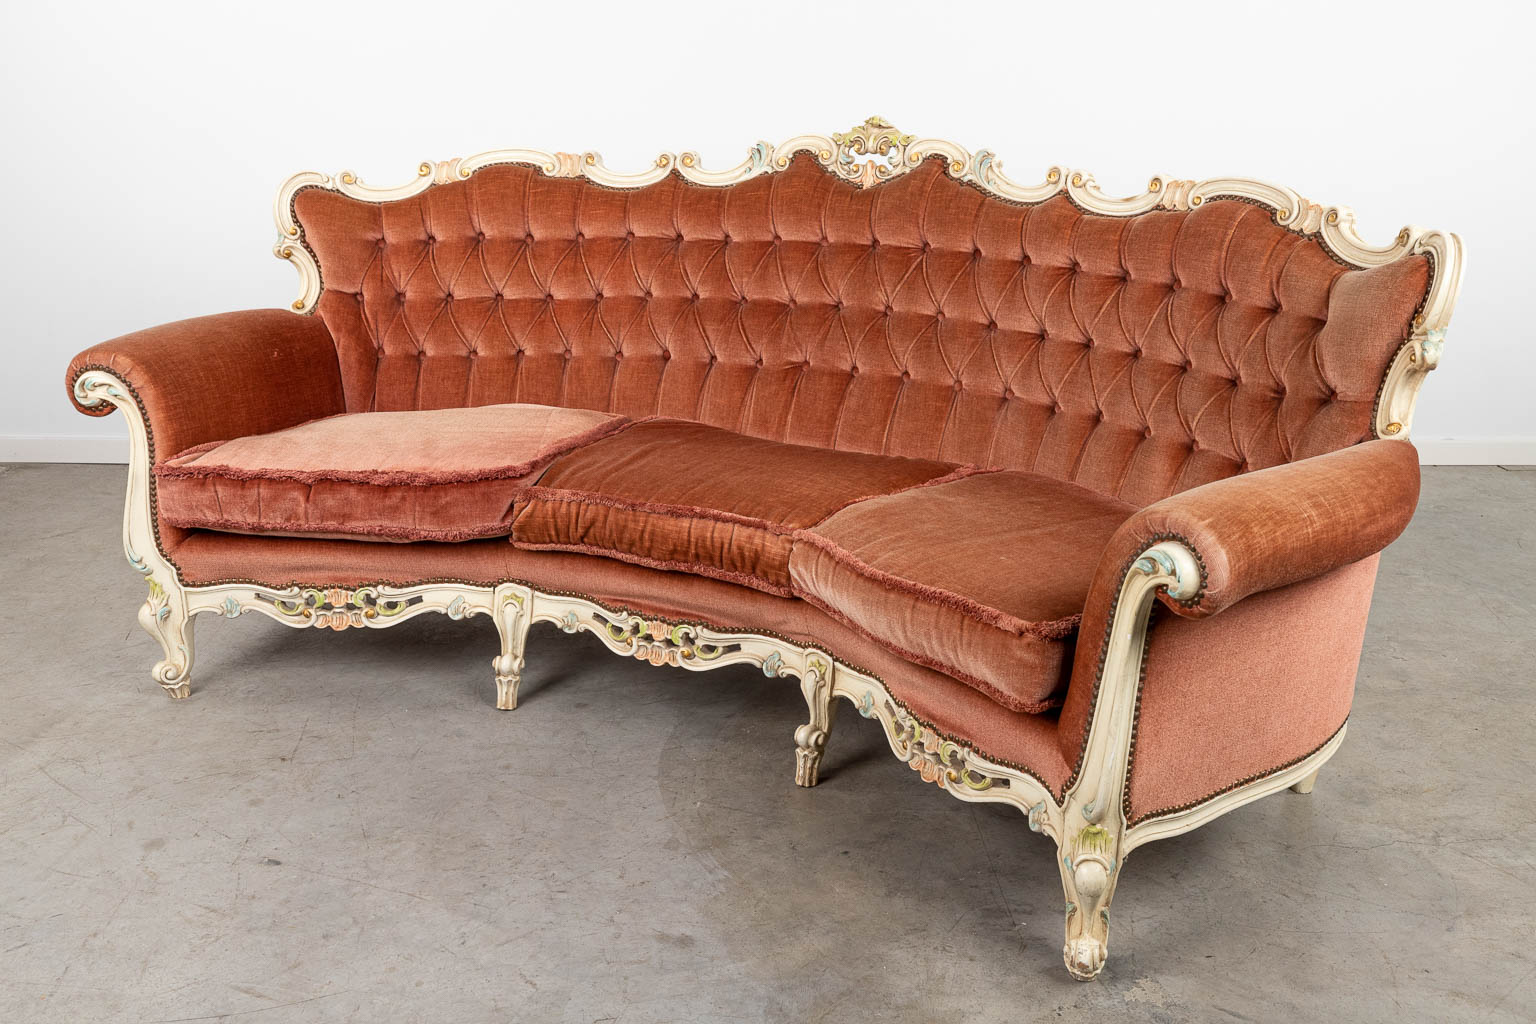 A three-piece salon suite made in Louis XV style. (H:95cm)